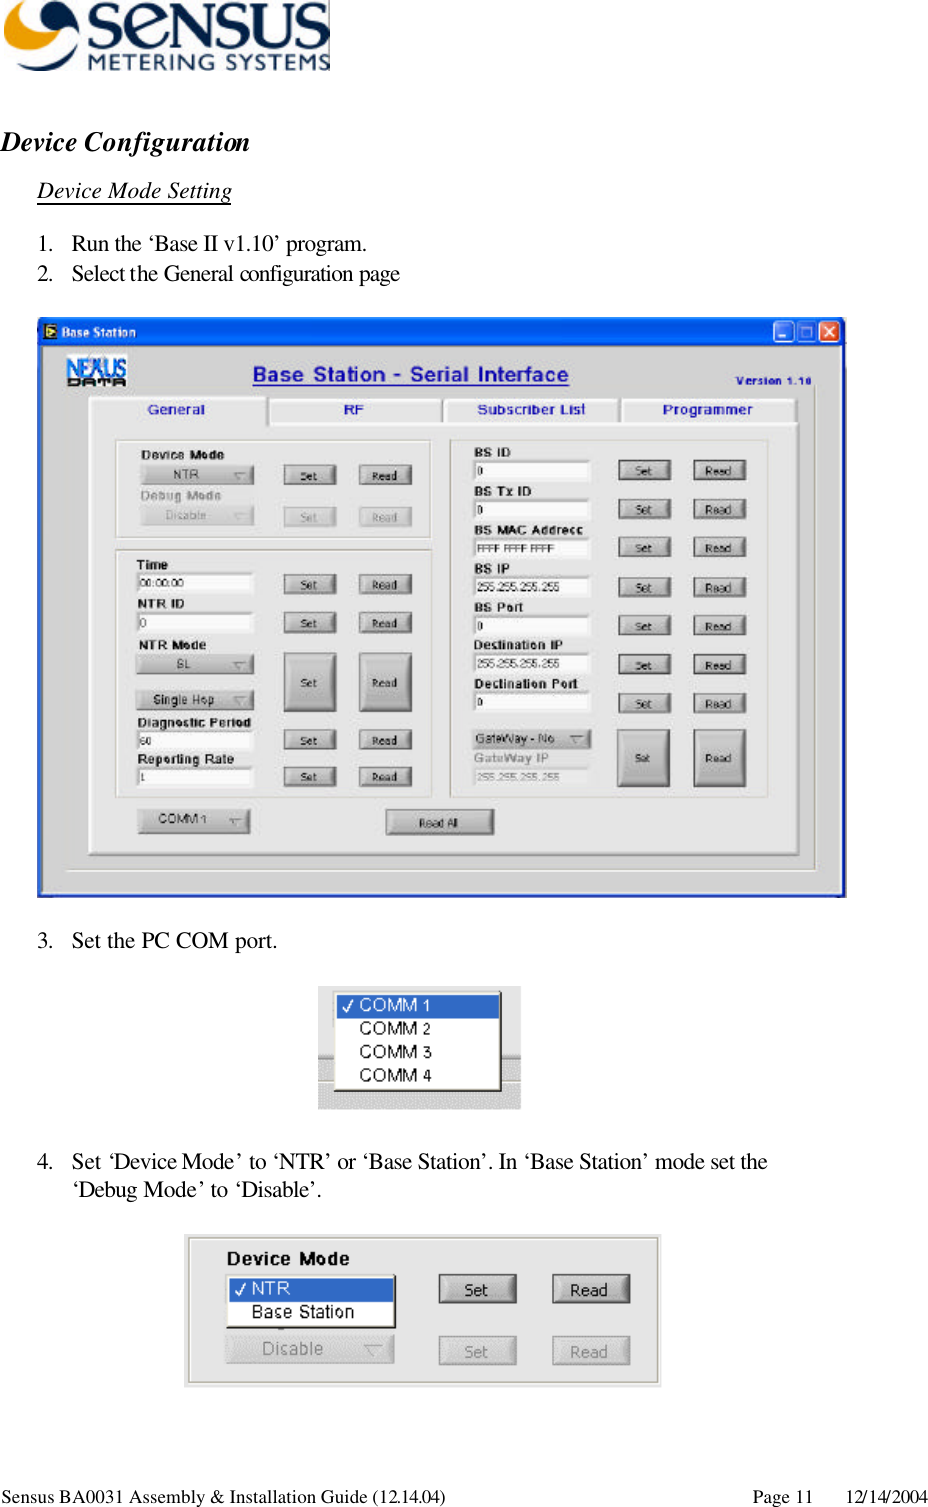      Sensus BA0031 Assembly &amp; Installation Guide (12.14.04) Page 11 12/14/2004 Device Configuration Device Mode Setting 1. Run the ‘Base II v1.10’ program. 2. Select the General configuration page     3. Set the PC COM port.    4. Set ‘Device Mode’ to ‘NTR’ or ‘Base Station’. In ‘Base Station’ mode set the ‘Debug  Mode’ to ‘Disable’.   